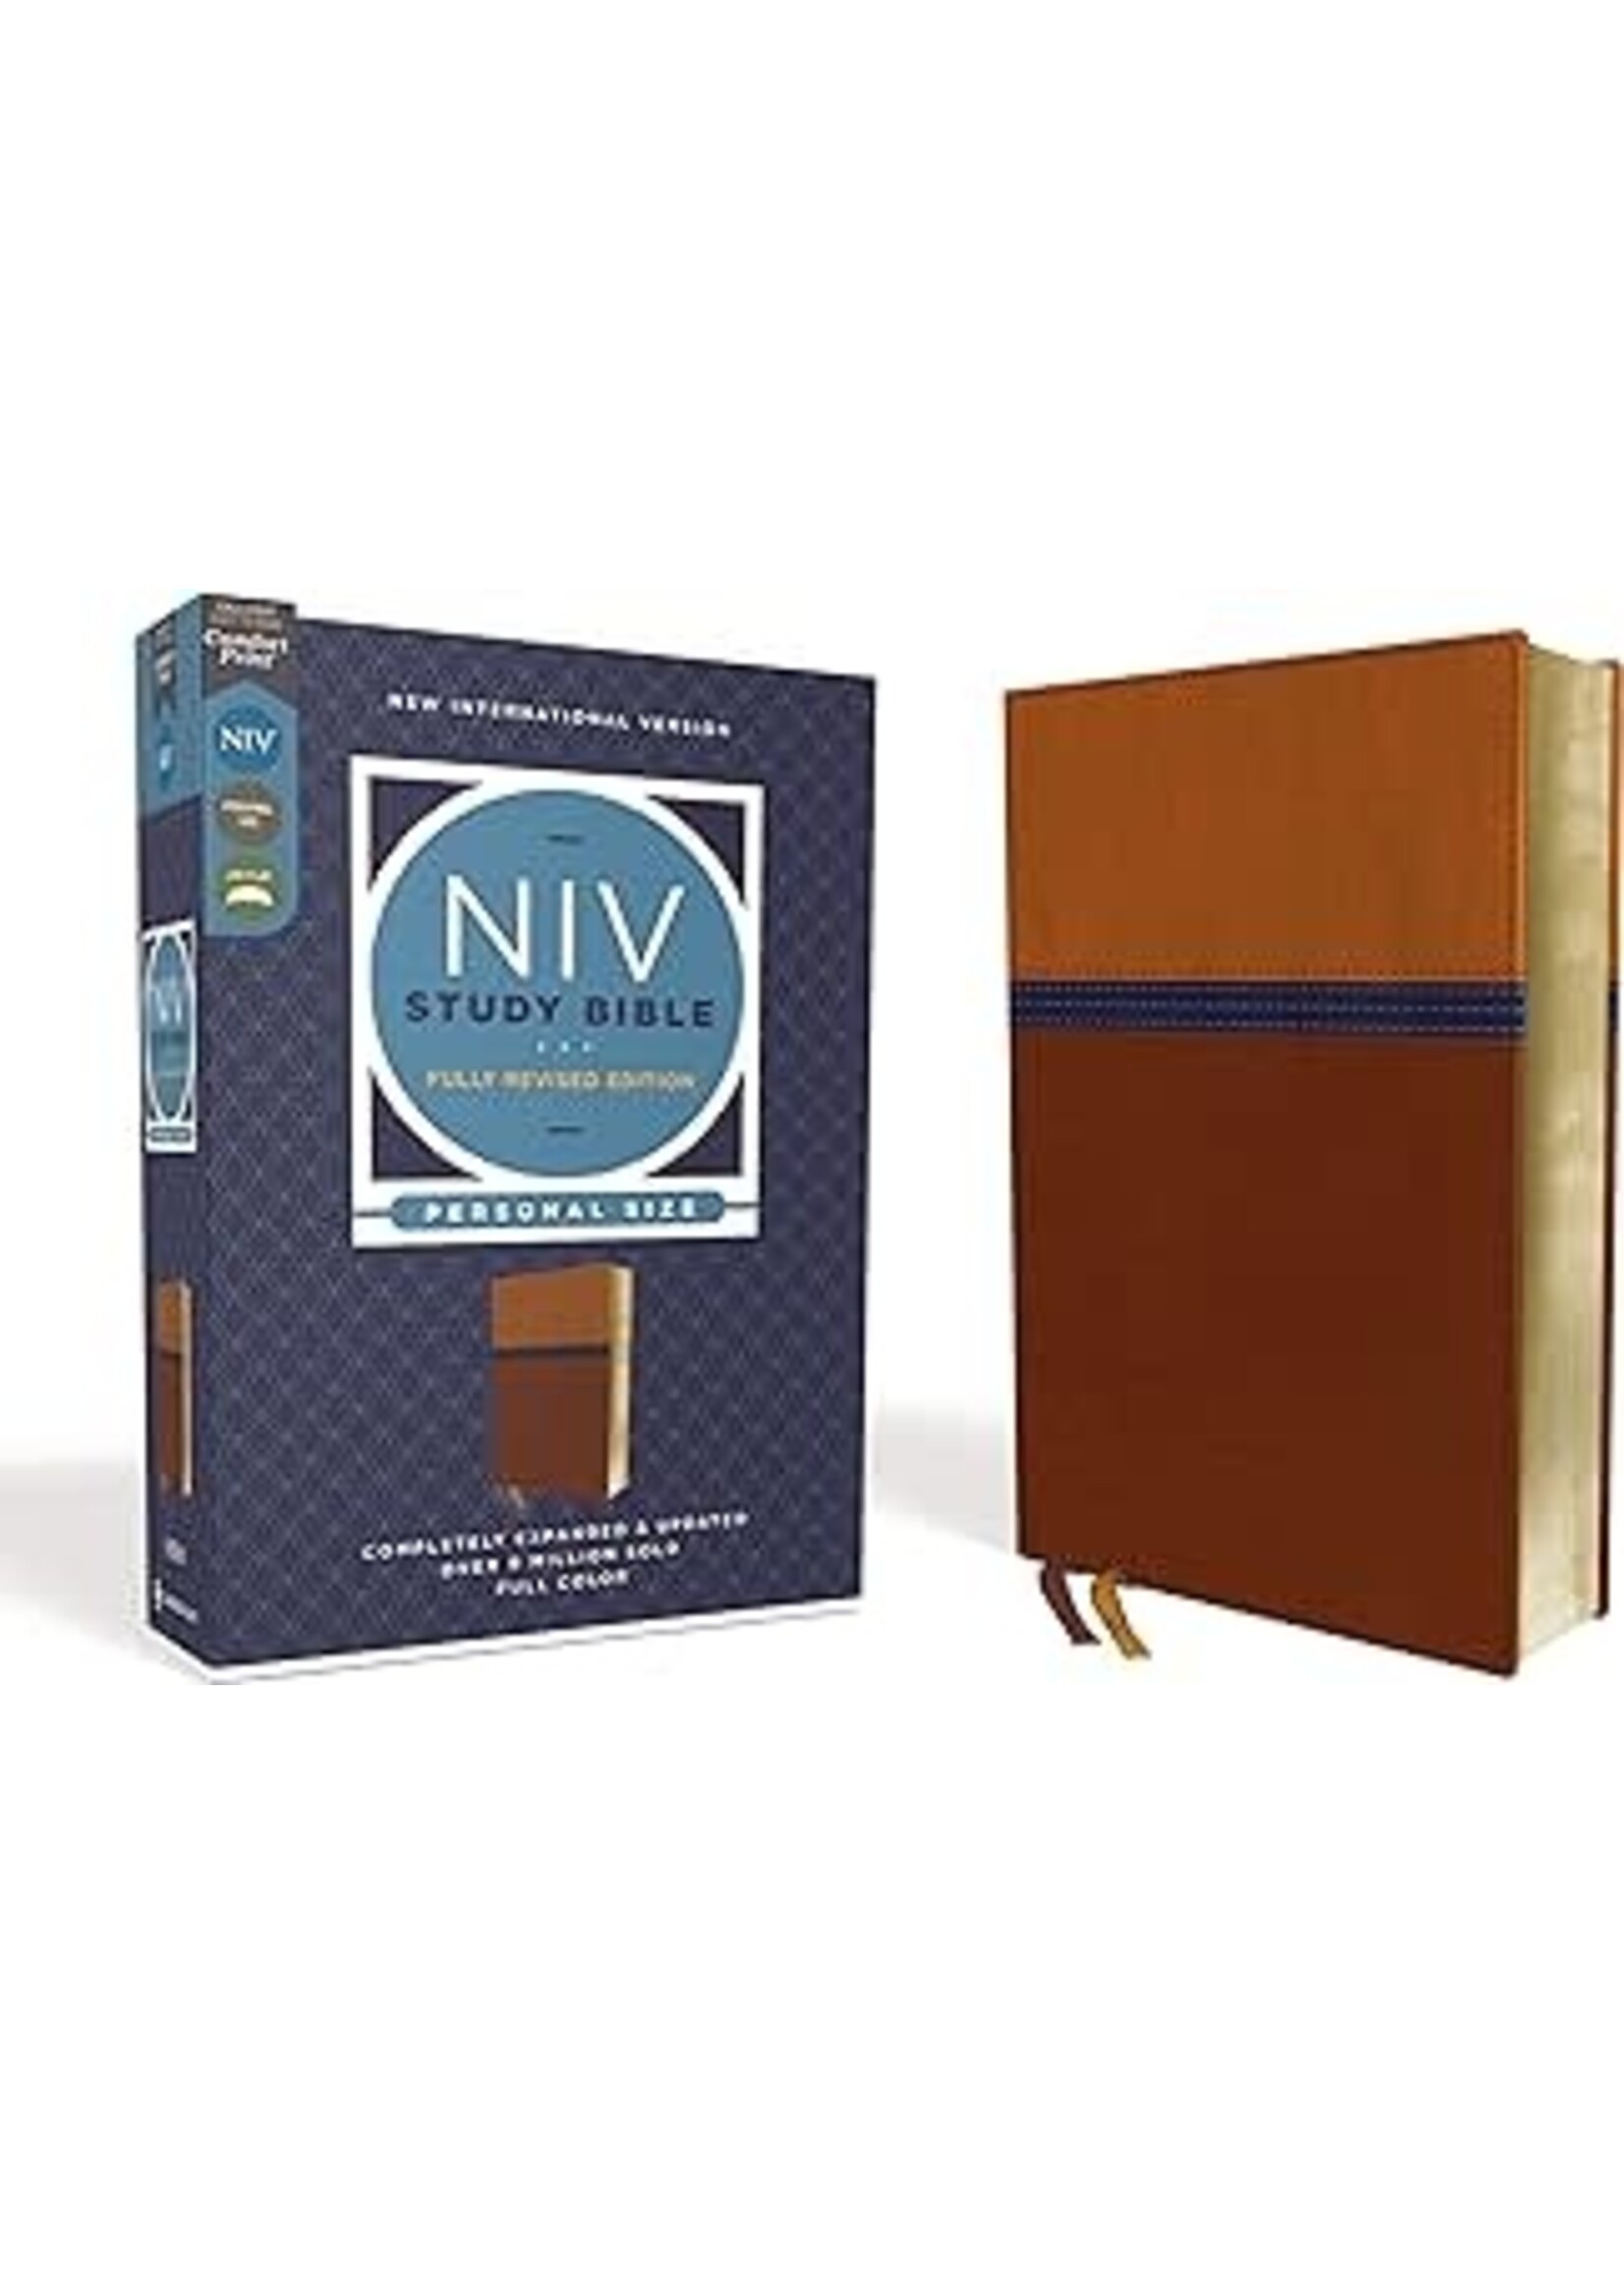 NIV Study Bible/Personal Size (Fully Revised Edition) (Comfort Print)-Brown/Blue Leathersoft